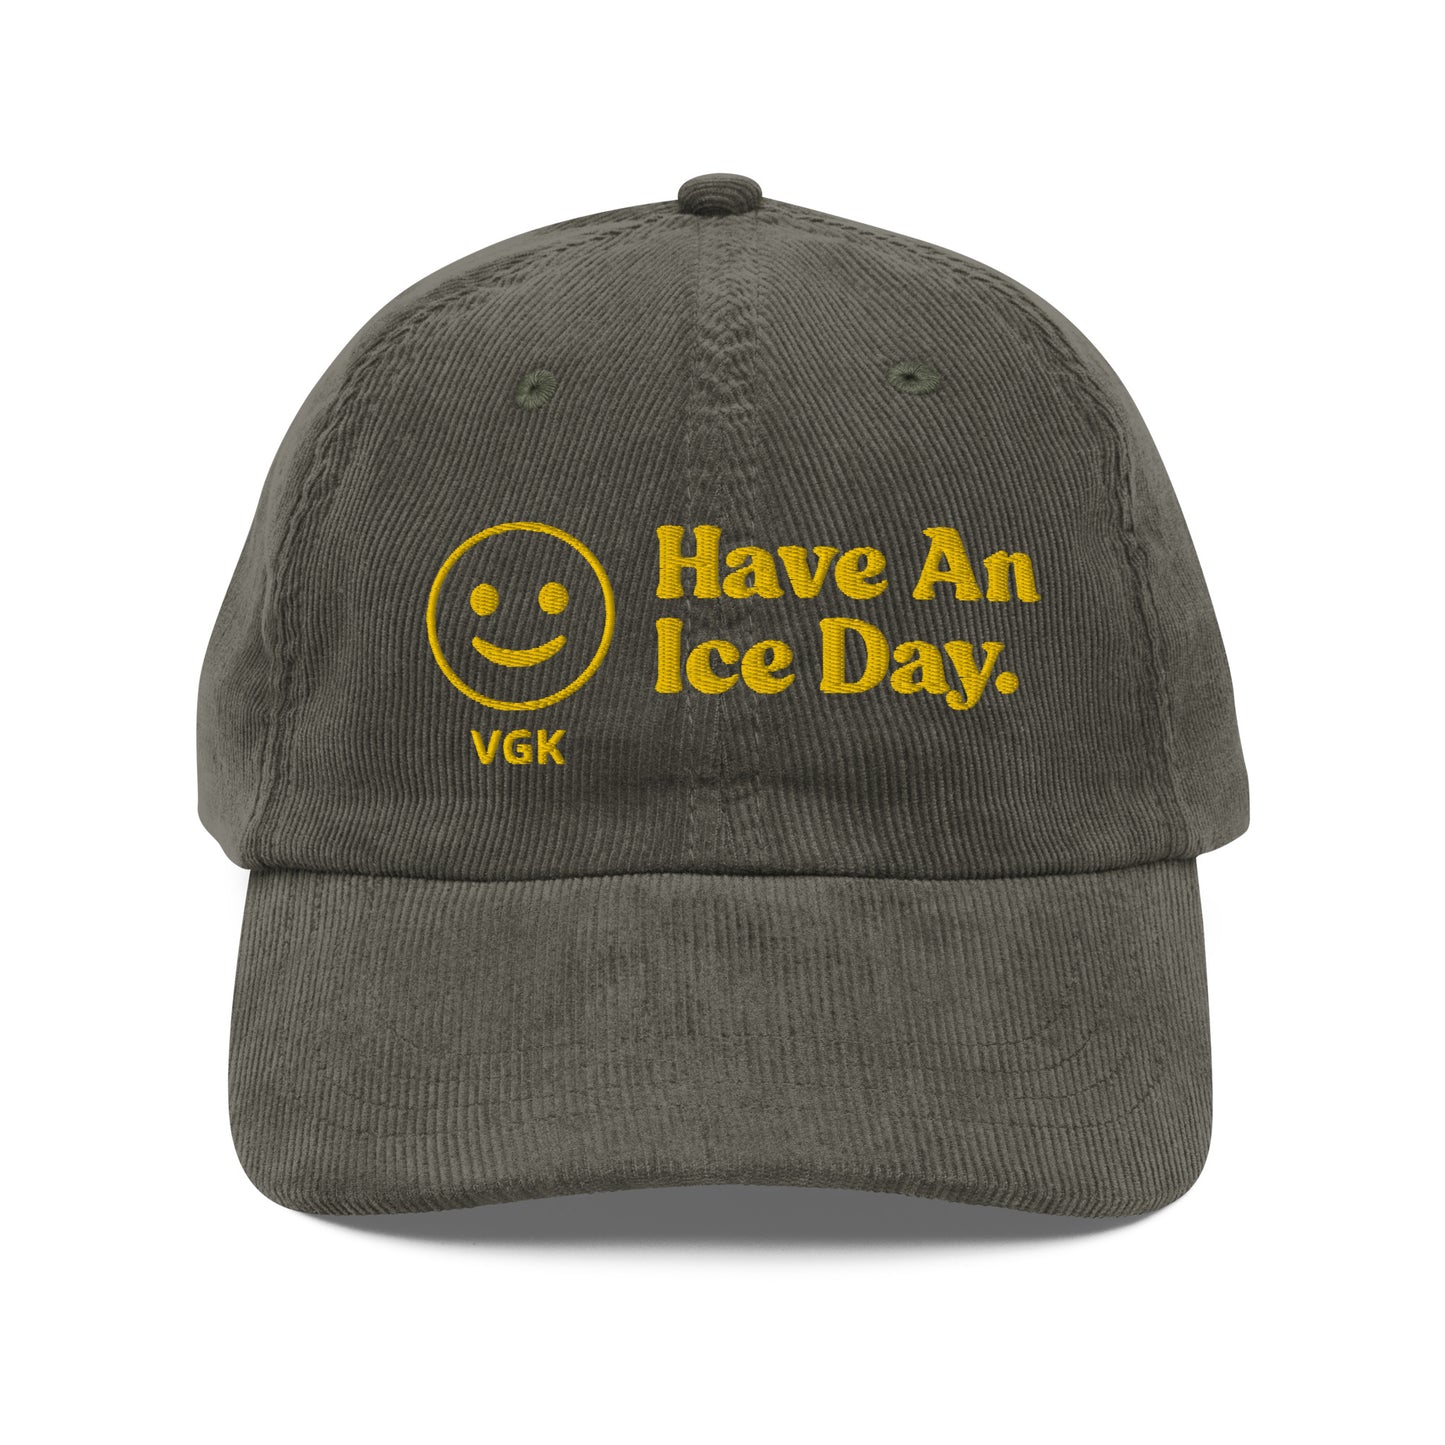 Have An Ice Day VGK Smiley Face Embroidered Vintage corduroy cap